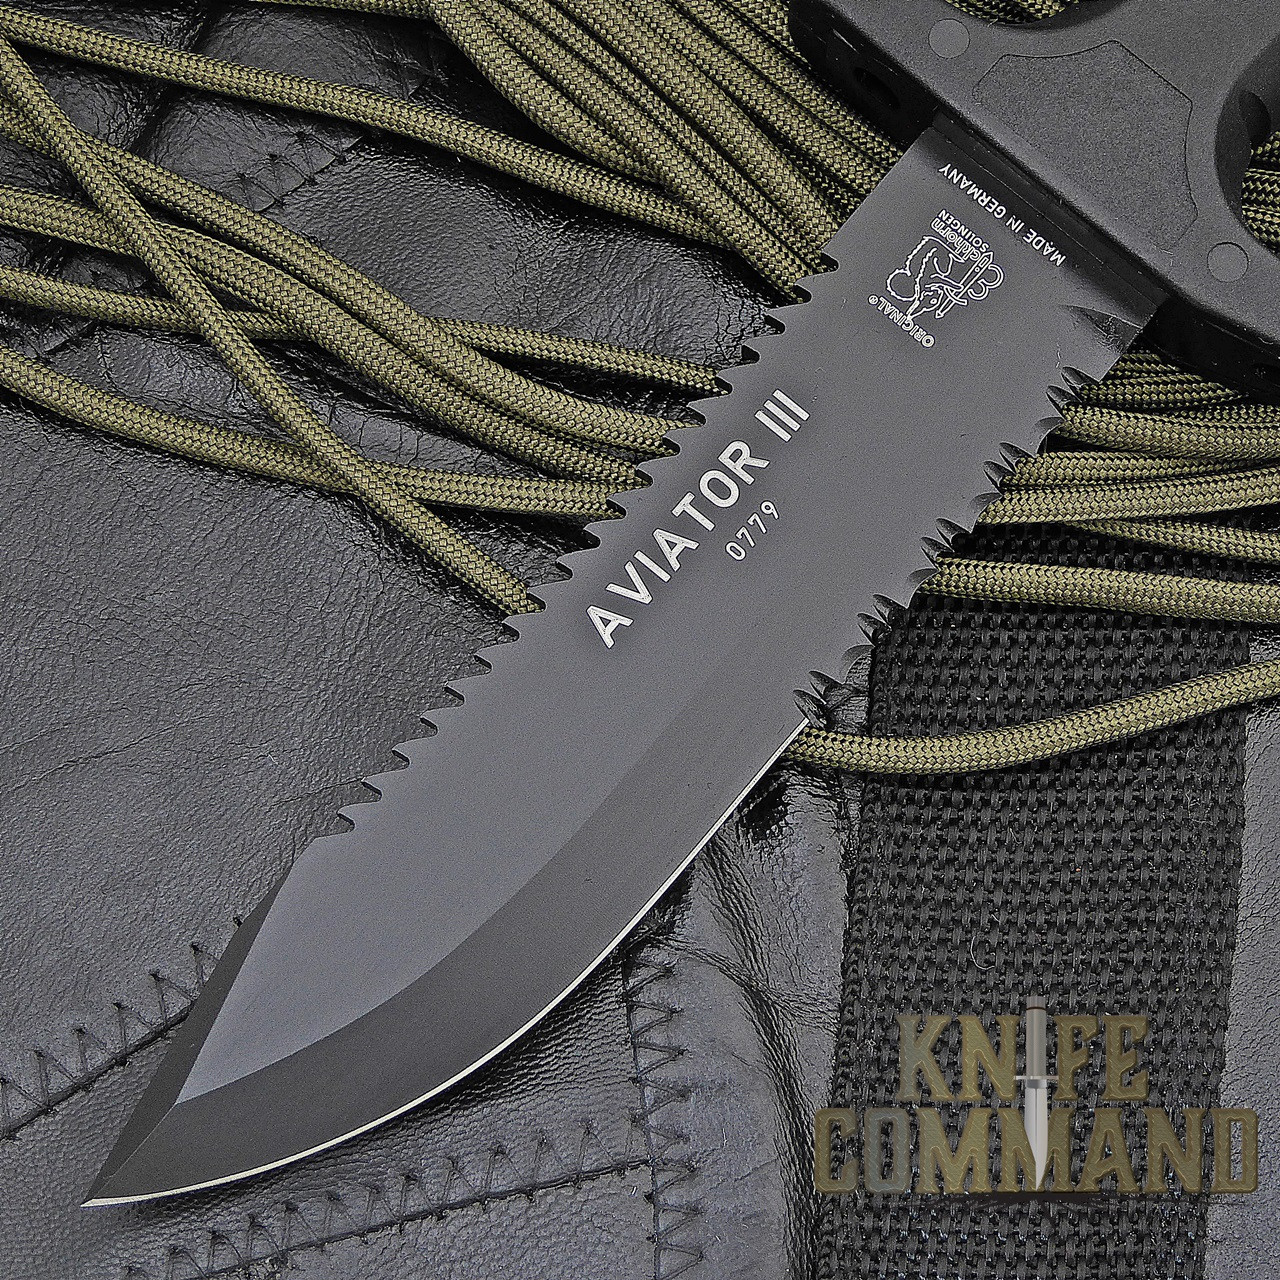 Eickhorn Solingen Aviator III Aircrew Rescue and Survival ASEK Combat Knife.  Saw back and serrations.